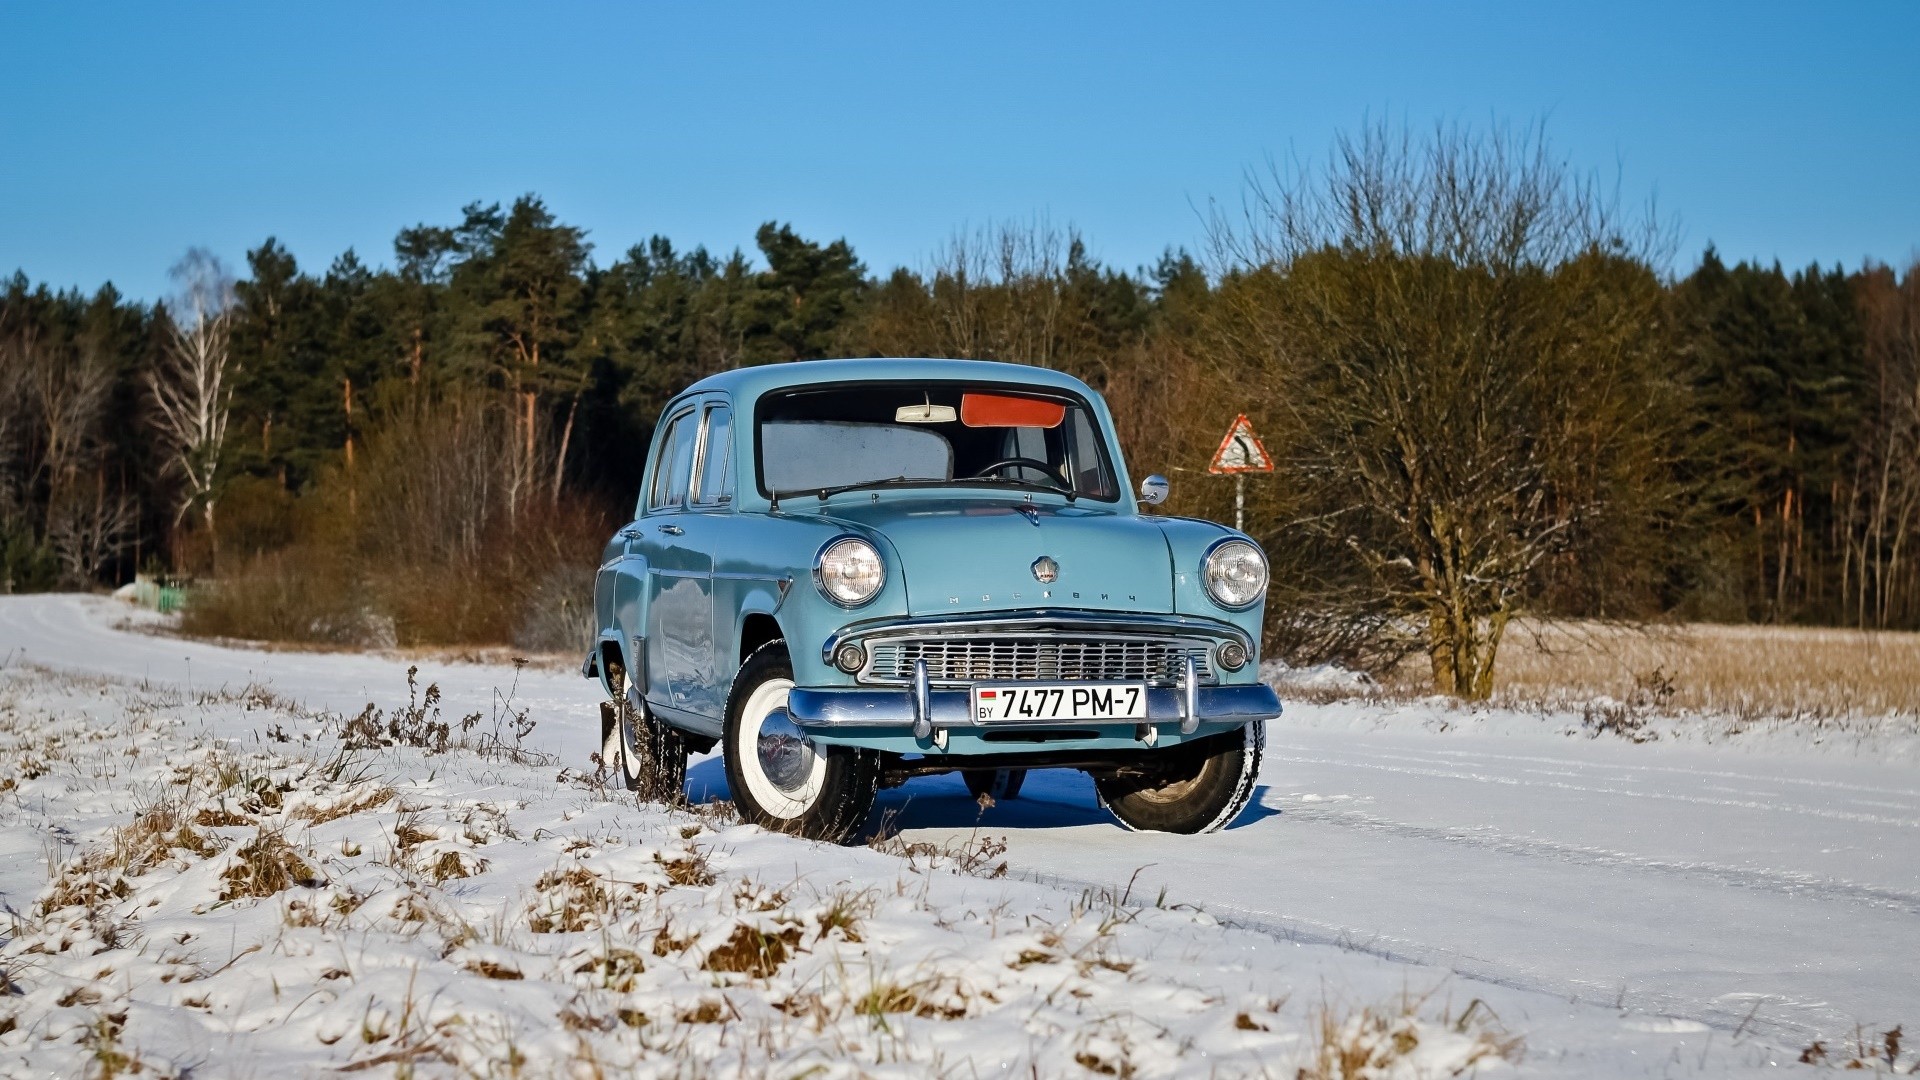 General 1920x1080 winter snow car vehicle blue cars Moskvich Russian cars old car